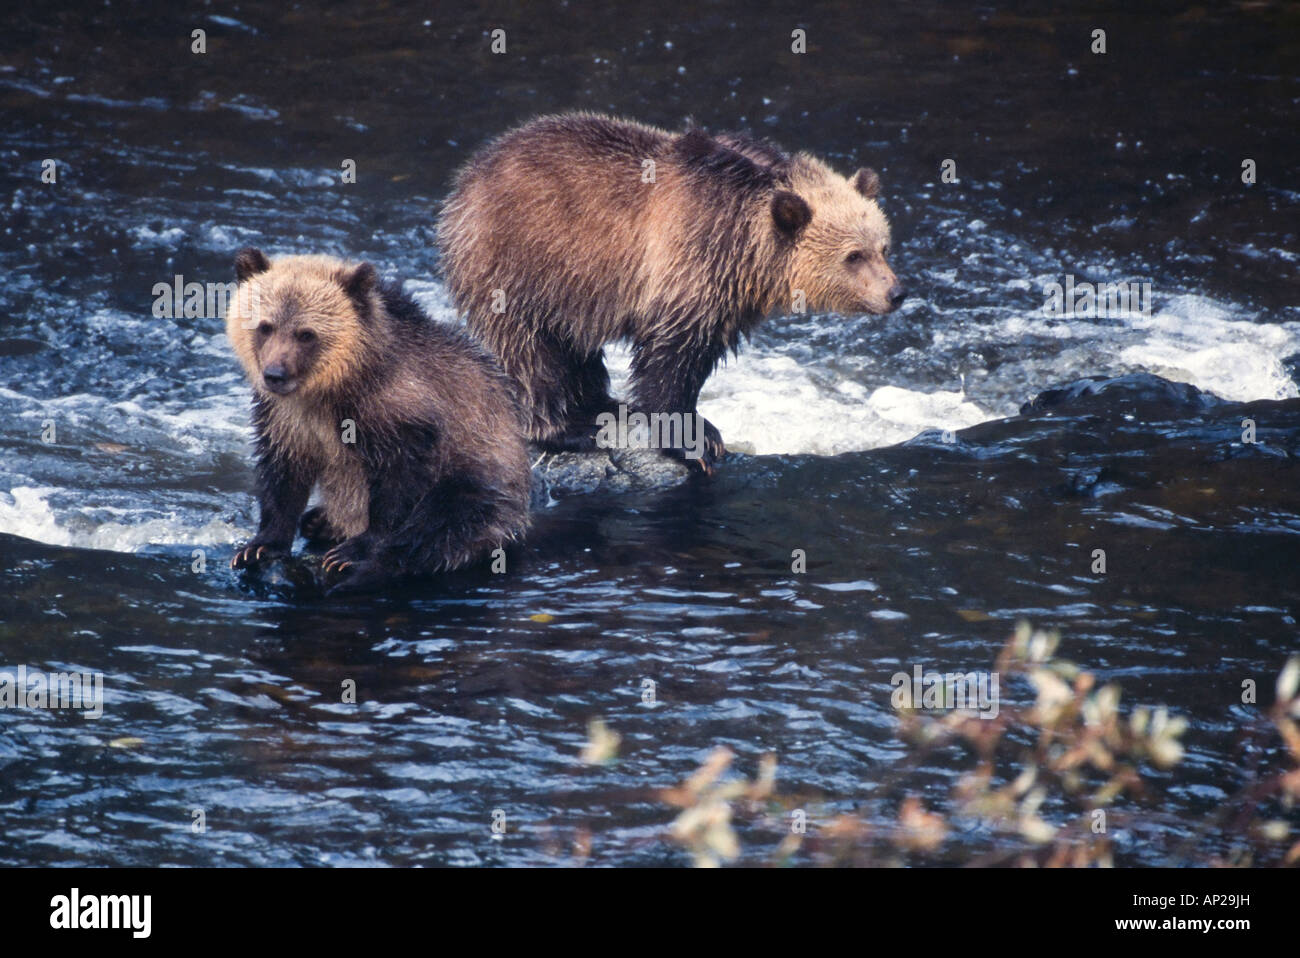 Two grizzly brown bear cubs sitting standing on rocks in water looking for salmon to catch Stock Photo